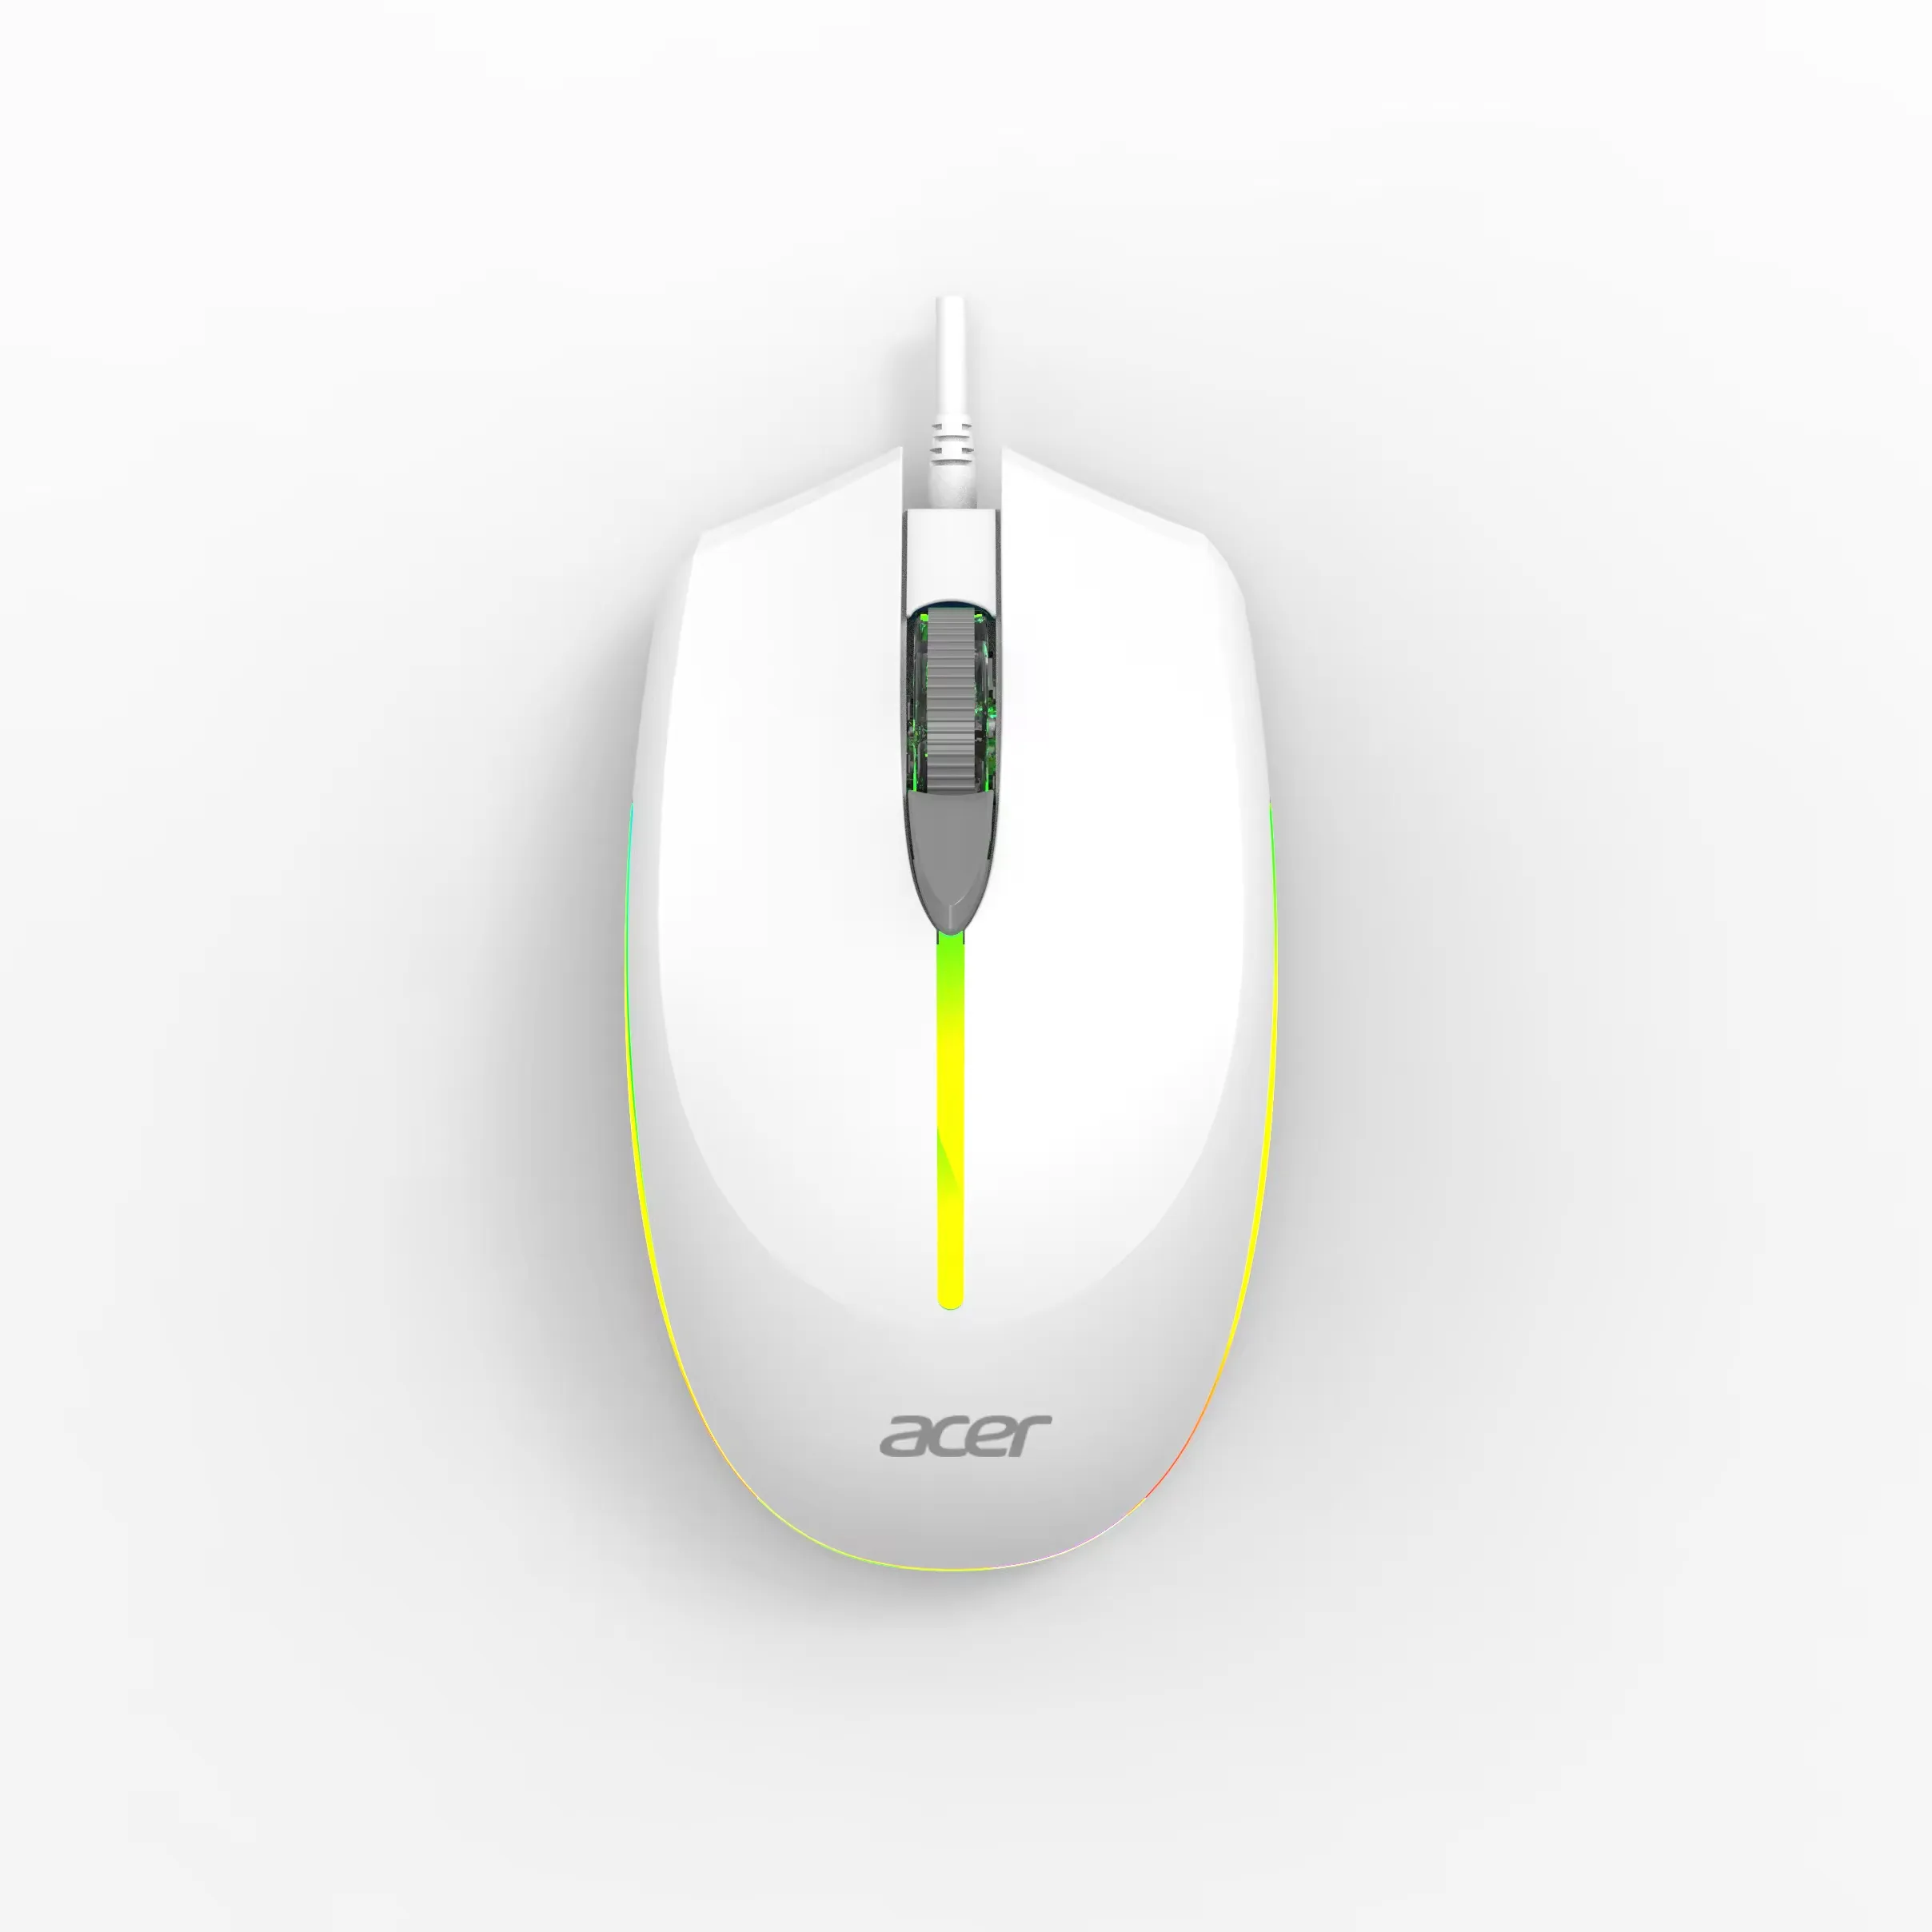 Acer Mouse con cable óptico Rainbow Lights para OEM